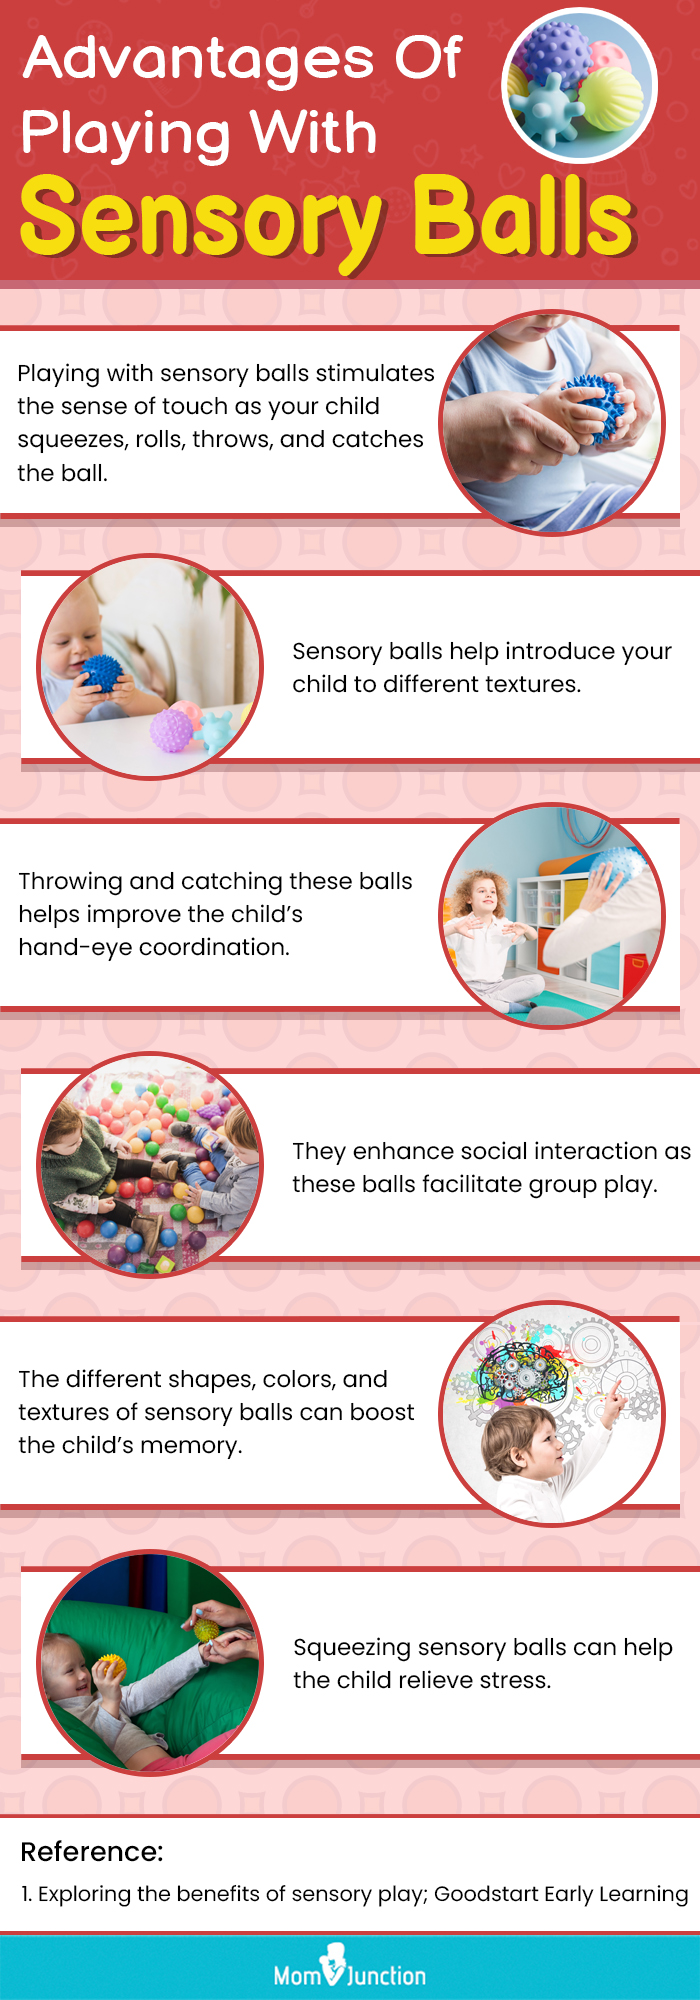 Advantages Of Playing With Sensory Balls (infographic)